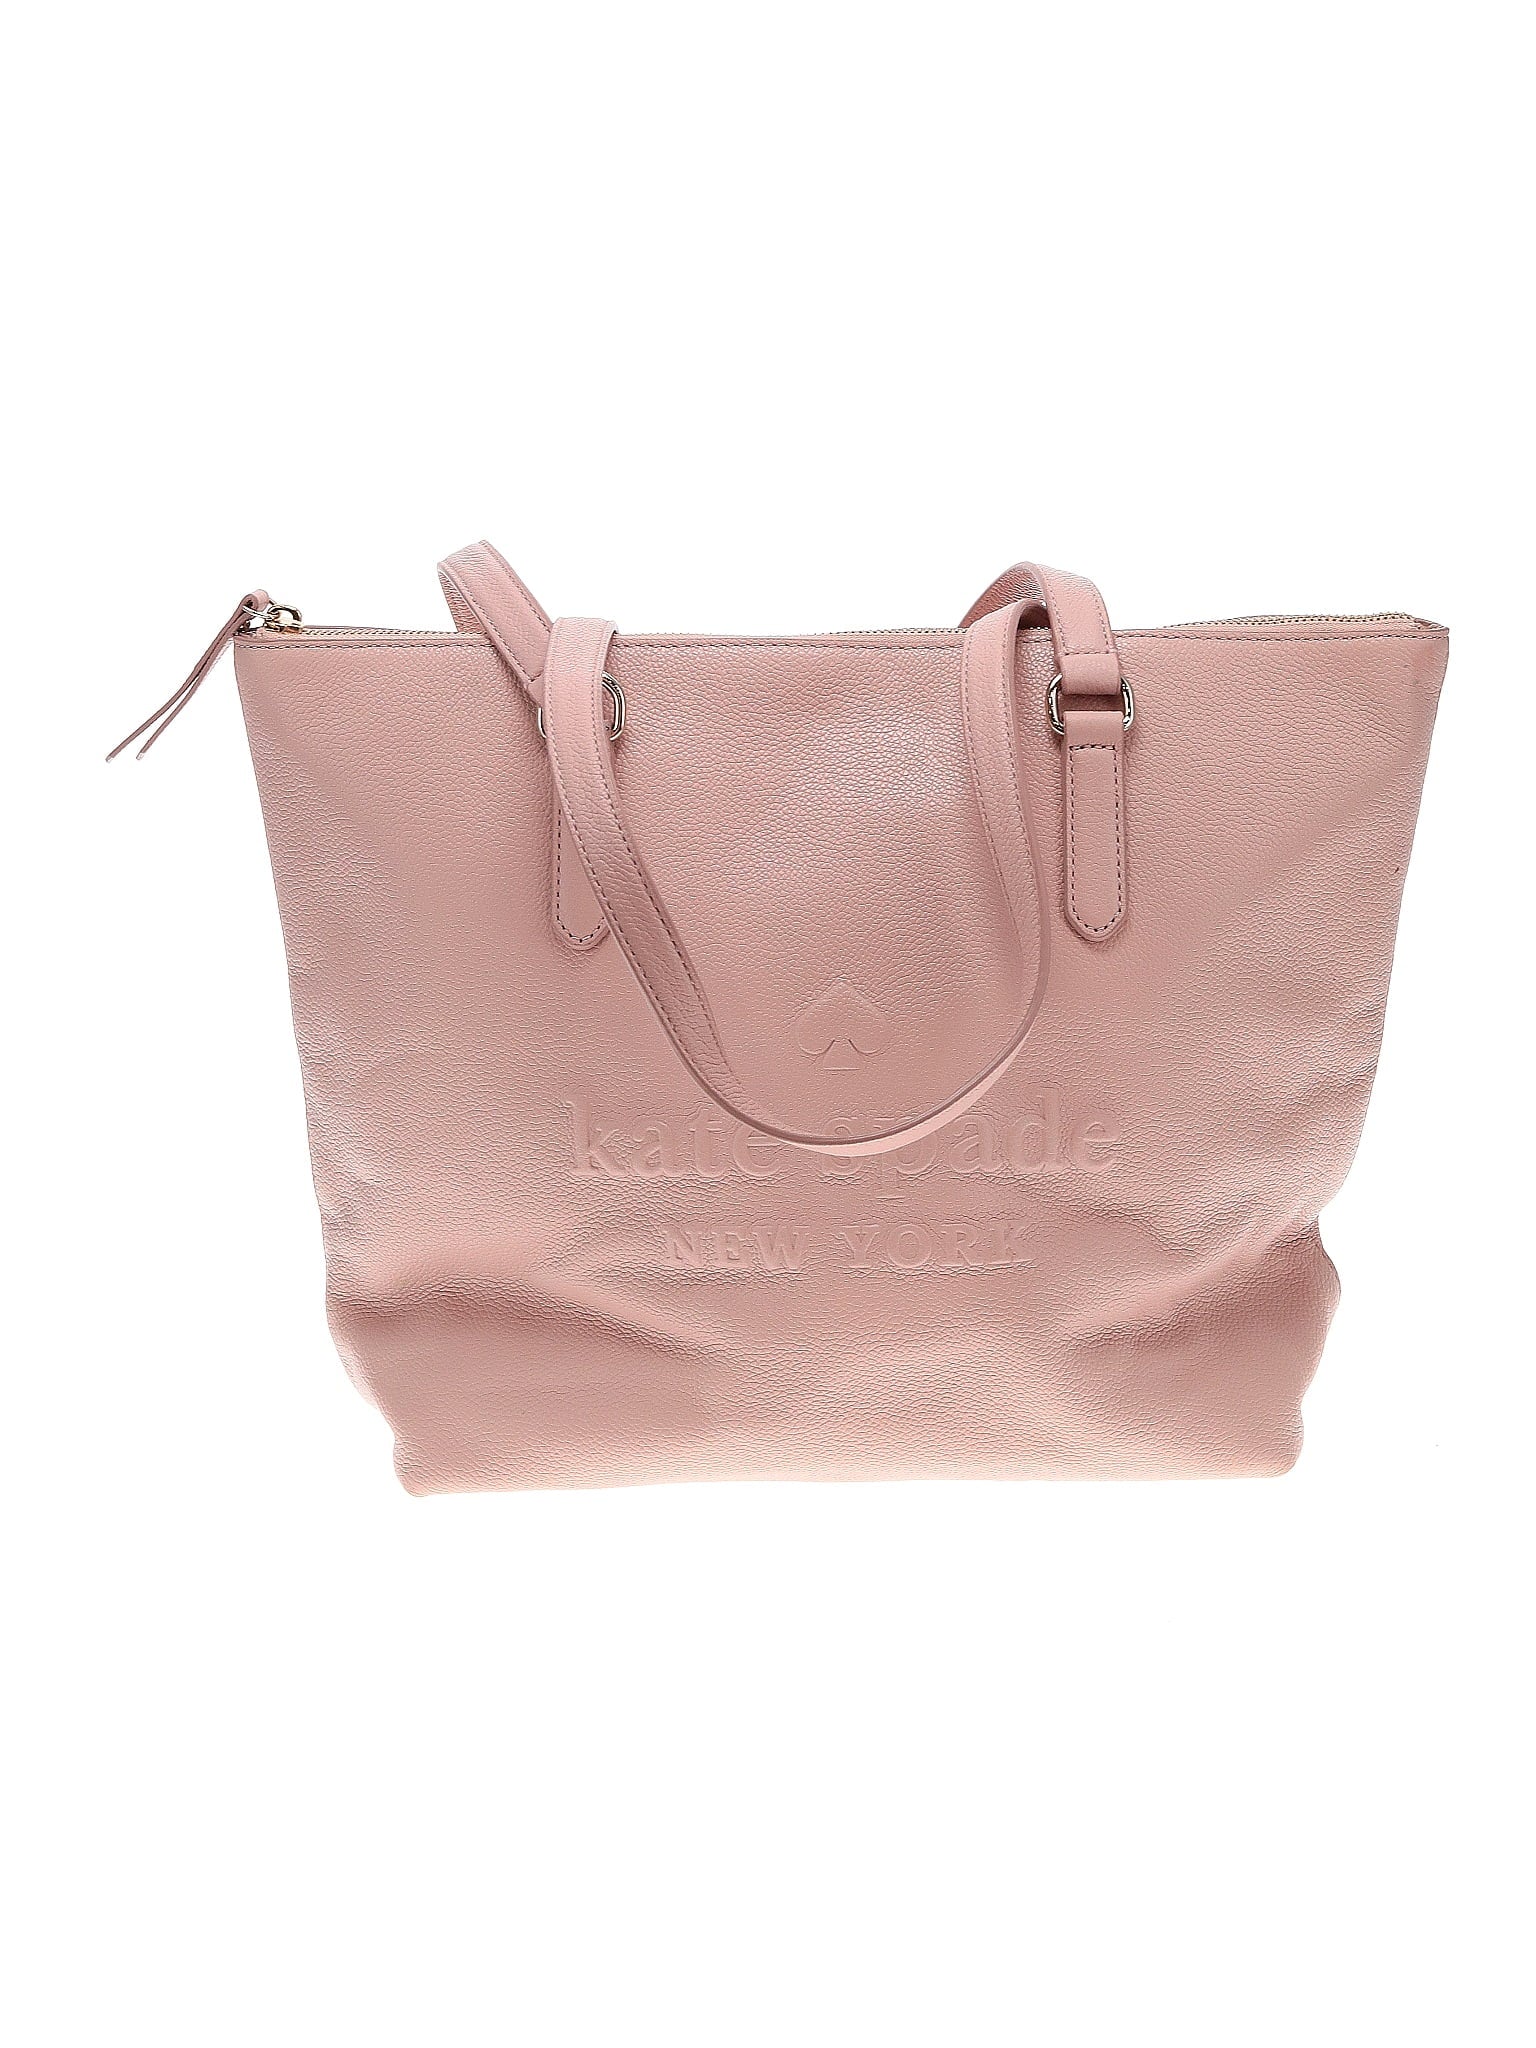 Leather Tote size - One Size